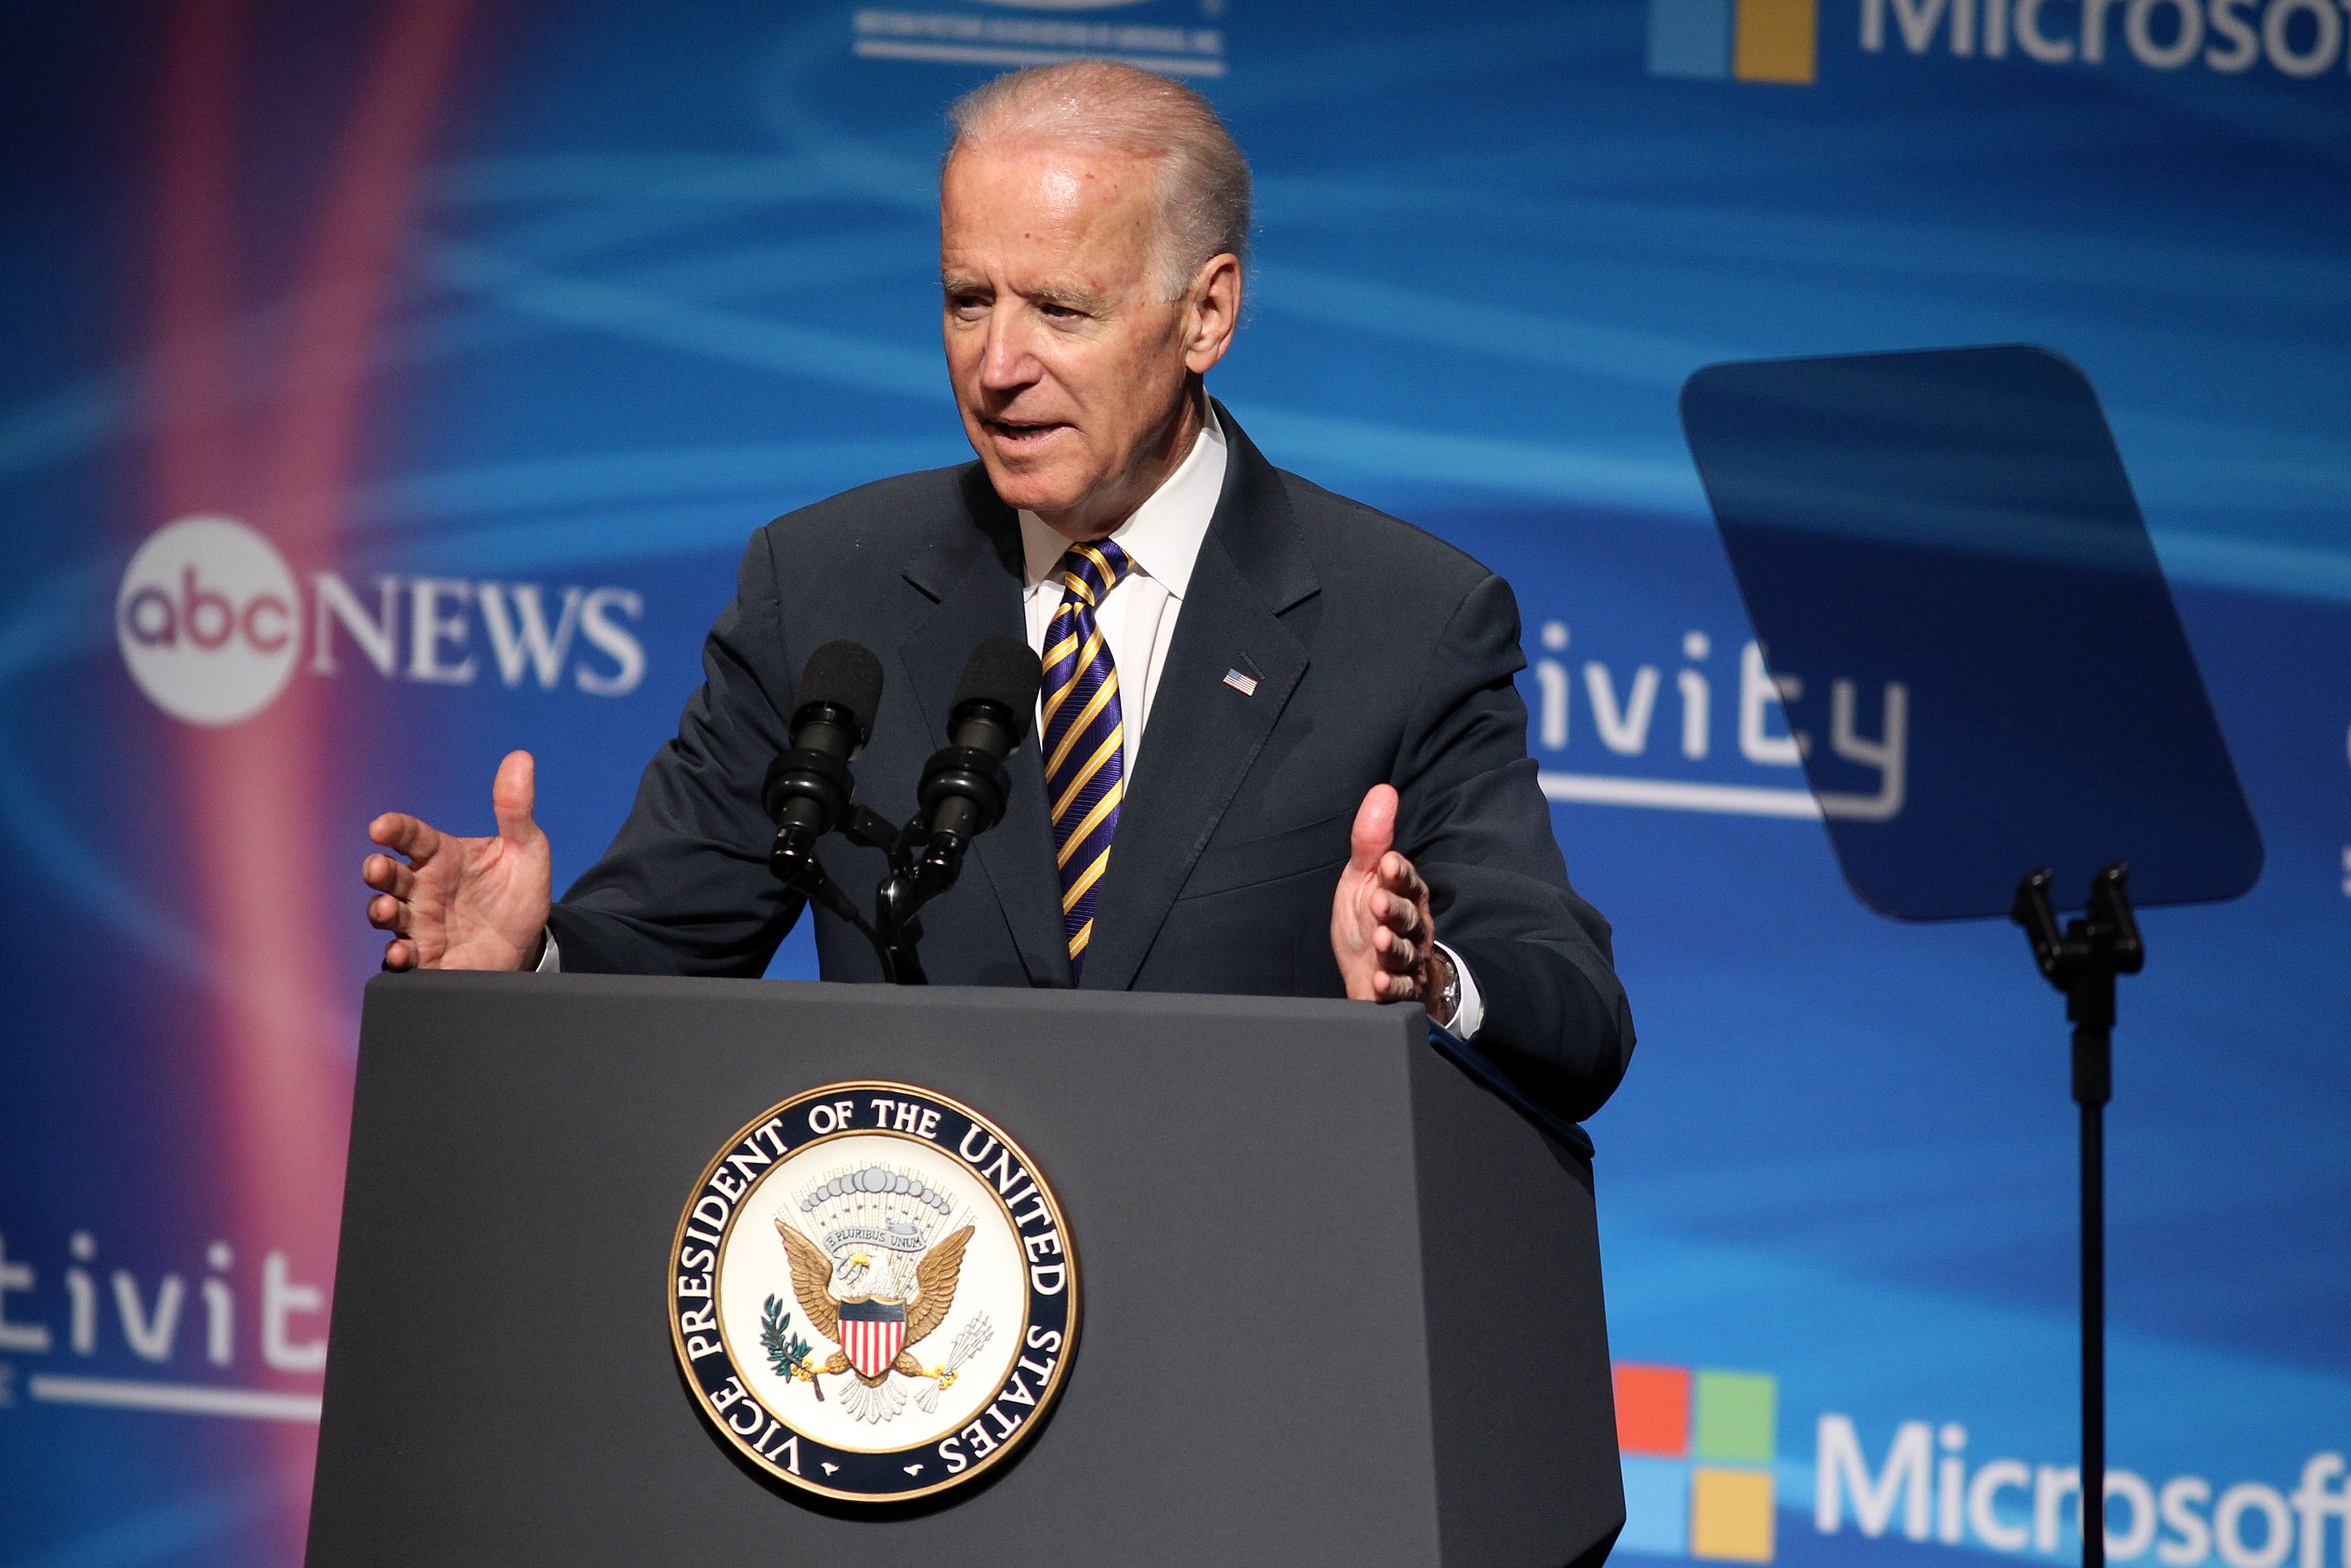 U.S. Vice President Joseph Biden discusses  international intellectual property protections at the 2nd Annual Creativity Conference presented by the Motion Picture Association of America at The Newseum on May 2, 2014 in Washington, D.C. (Paul Morigi—WireImage)